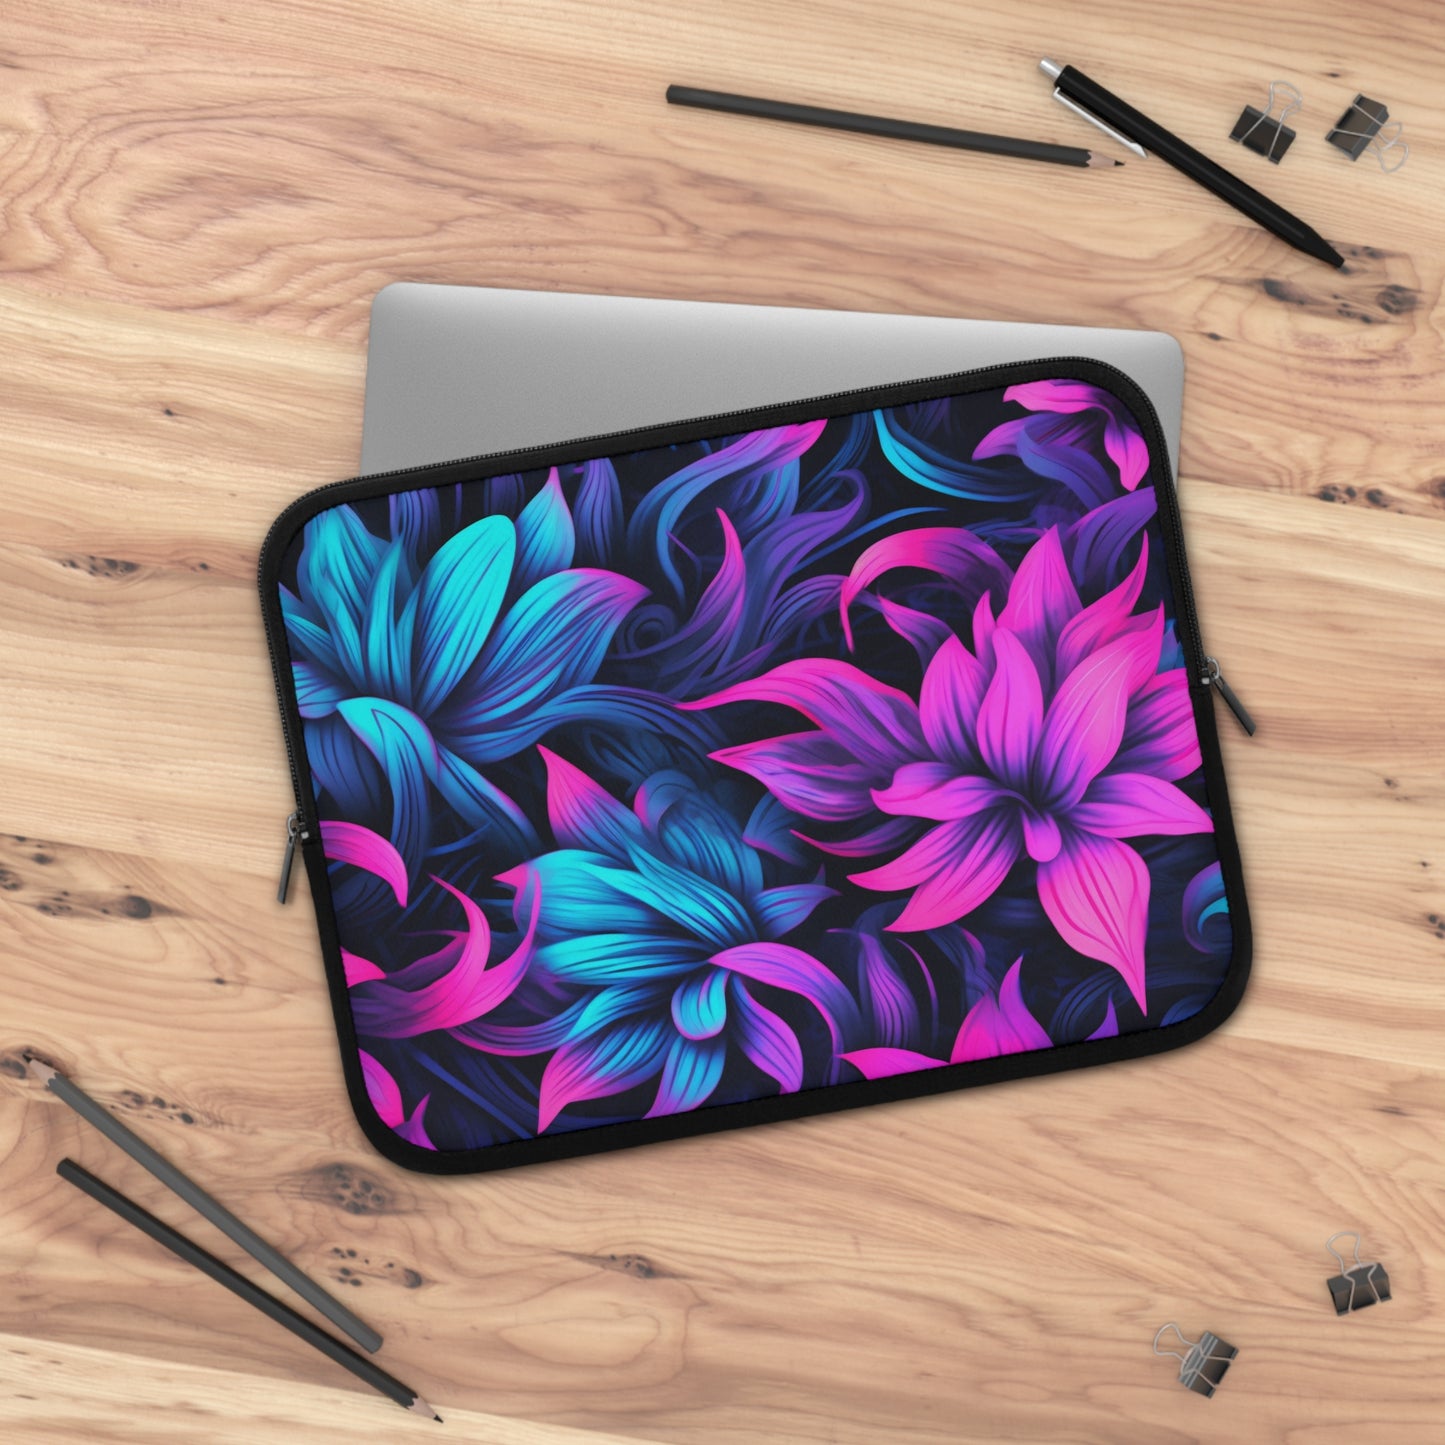 Synthwave Flowers Laptop SleeveNeon Synthwave Flowers Laptop Sleeve, Vaporwave Tablet Sleeve, Pink and Blue Retro iPad Cover, Floral Aesthetic MacBook Case, Laptop Bag